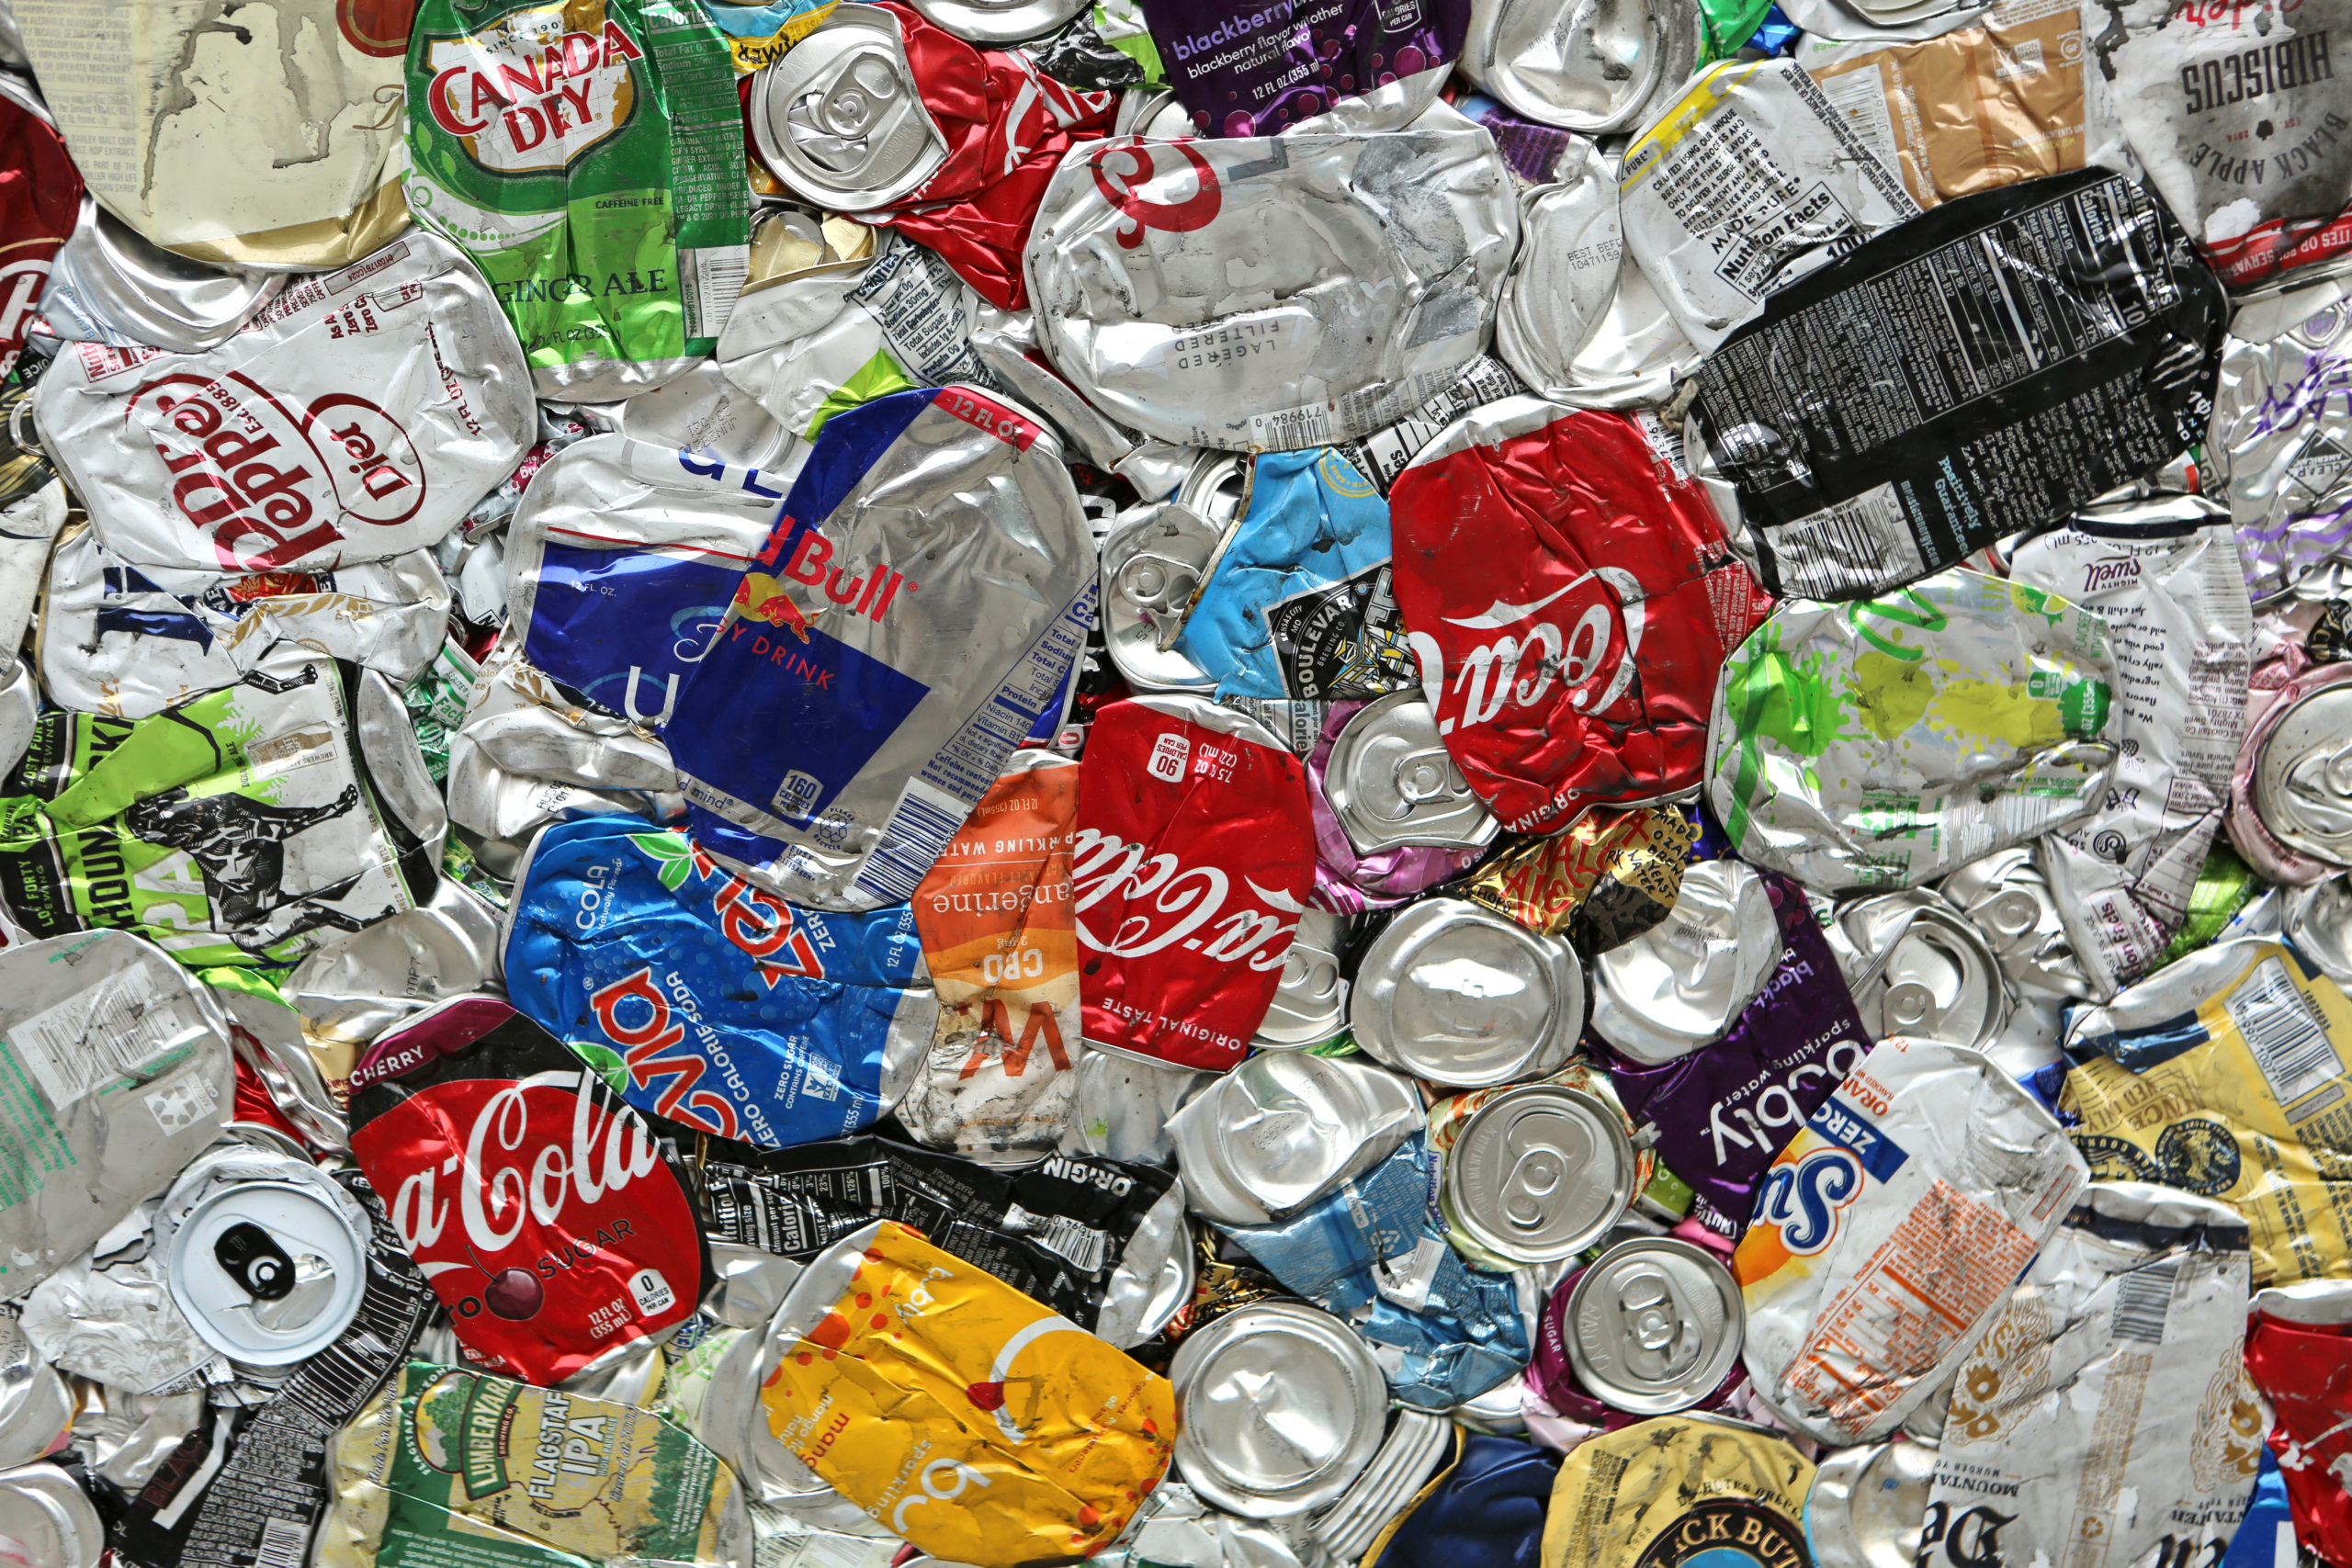 NWA survey highlights recycling as a top priority